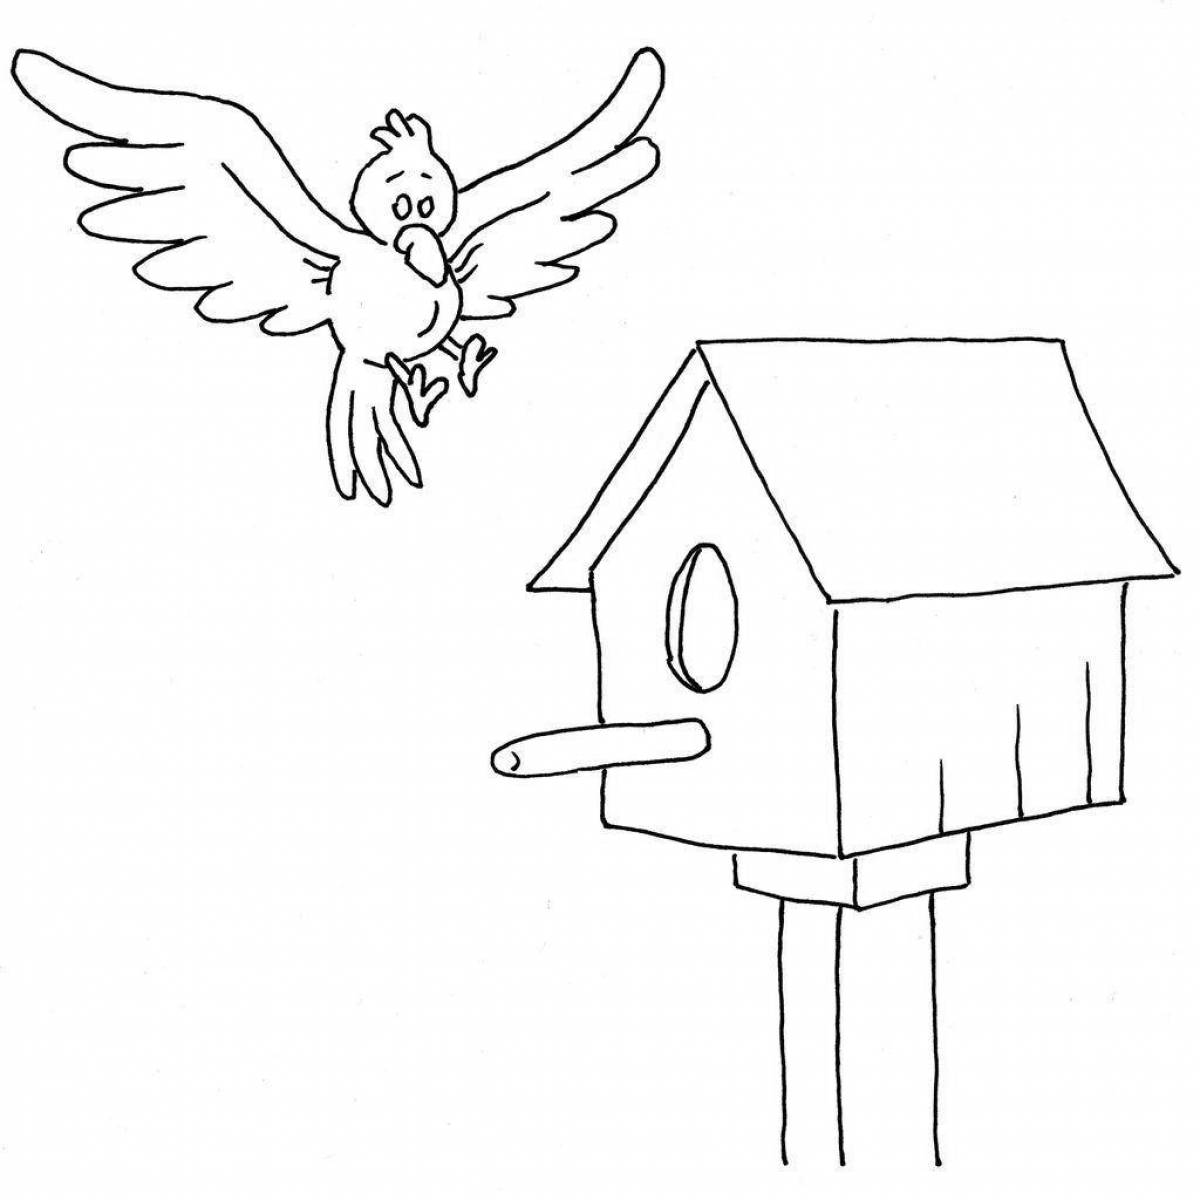 Playful birdhouse coloring page